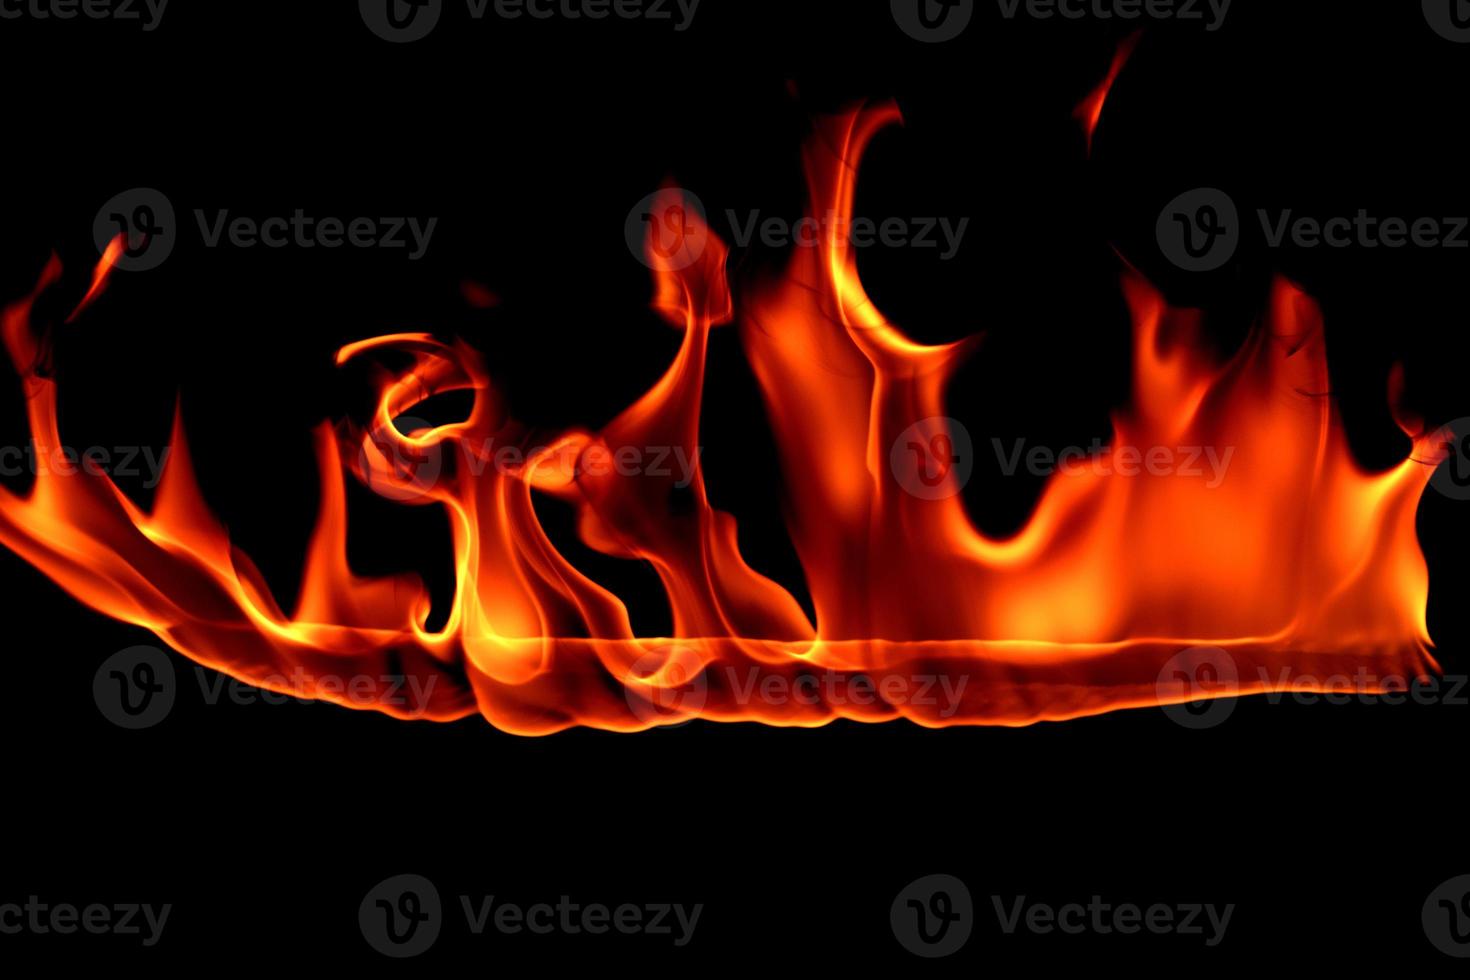 Fire flame on blackground photo